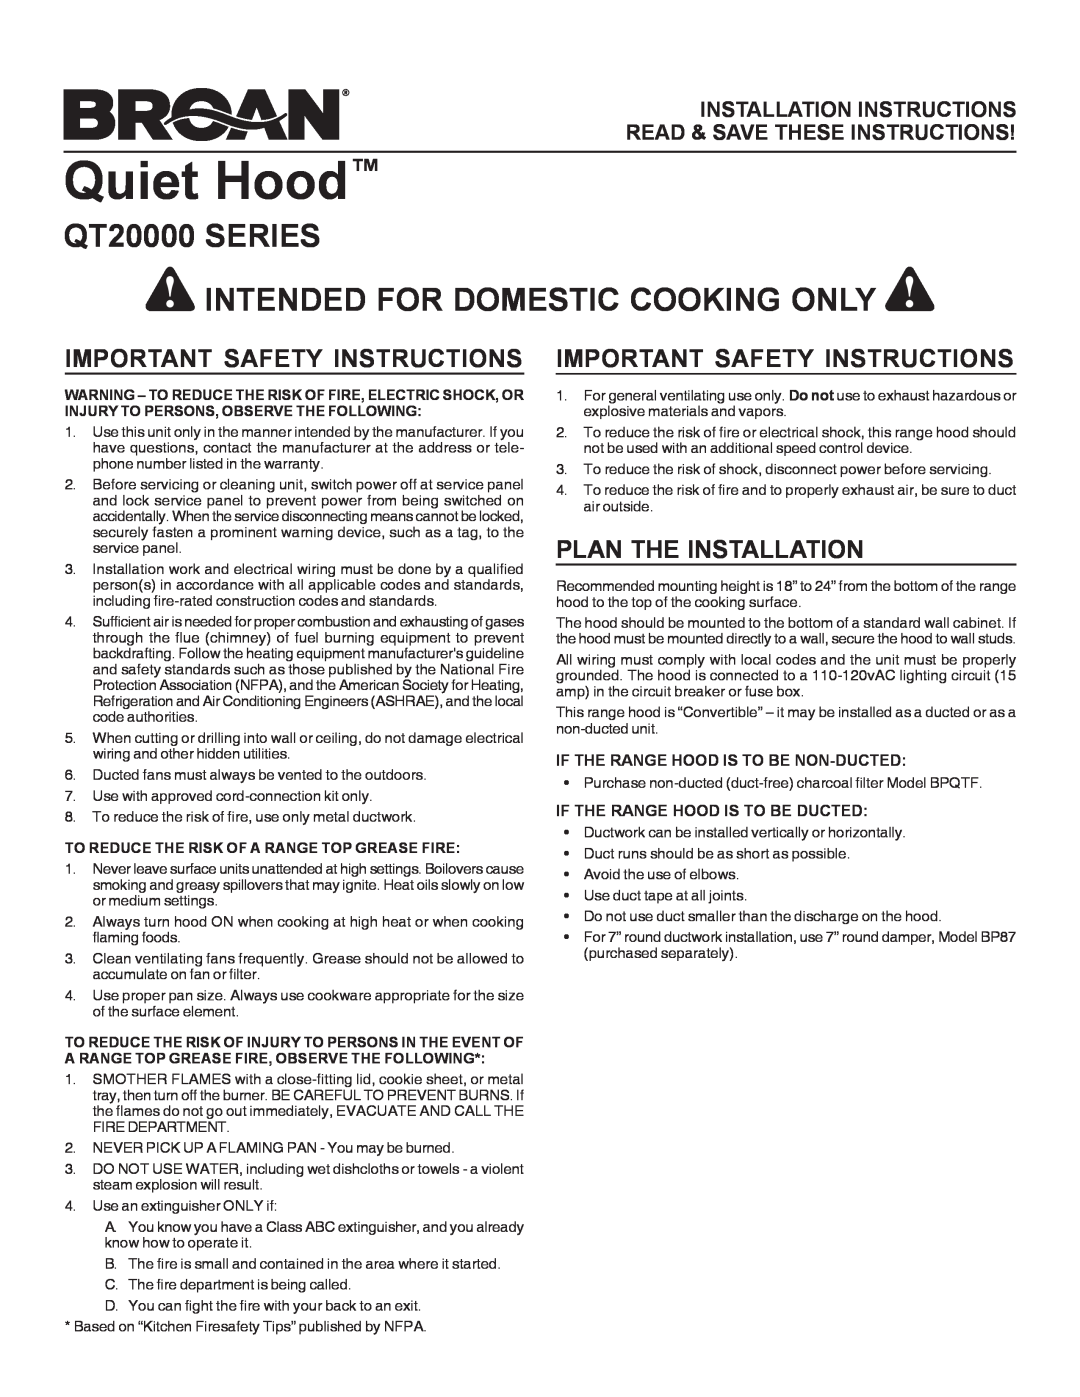 Broan QT230BL installation instructions Quiet Hood, QT20000 SERIES INTENDED FOR DOMESTIC COOKING ONLY 